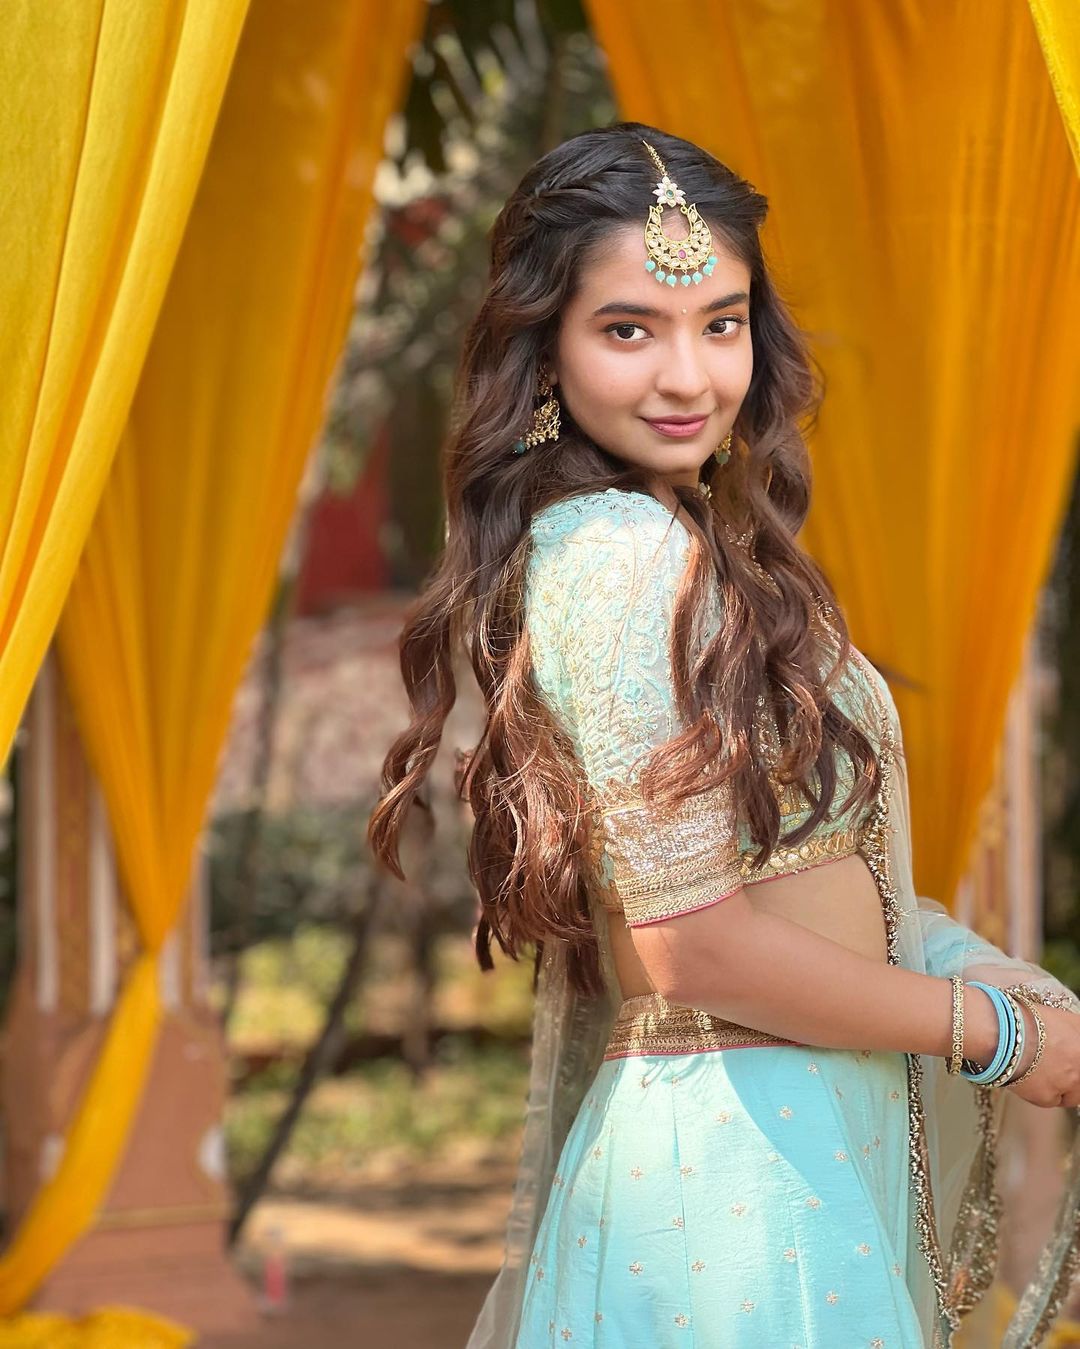 From Anushka Sen, Avneet Kaur to Jannat Zubair Rahmani: The traditional looks of these actresses rocked the hearts of fans 9592